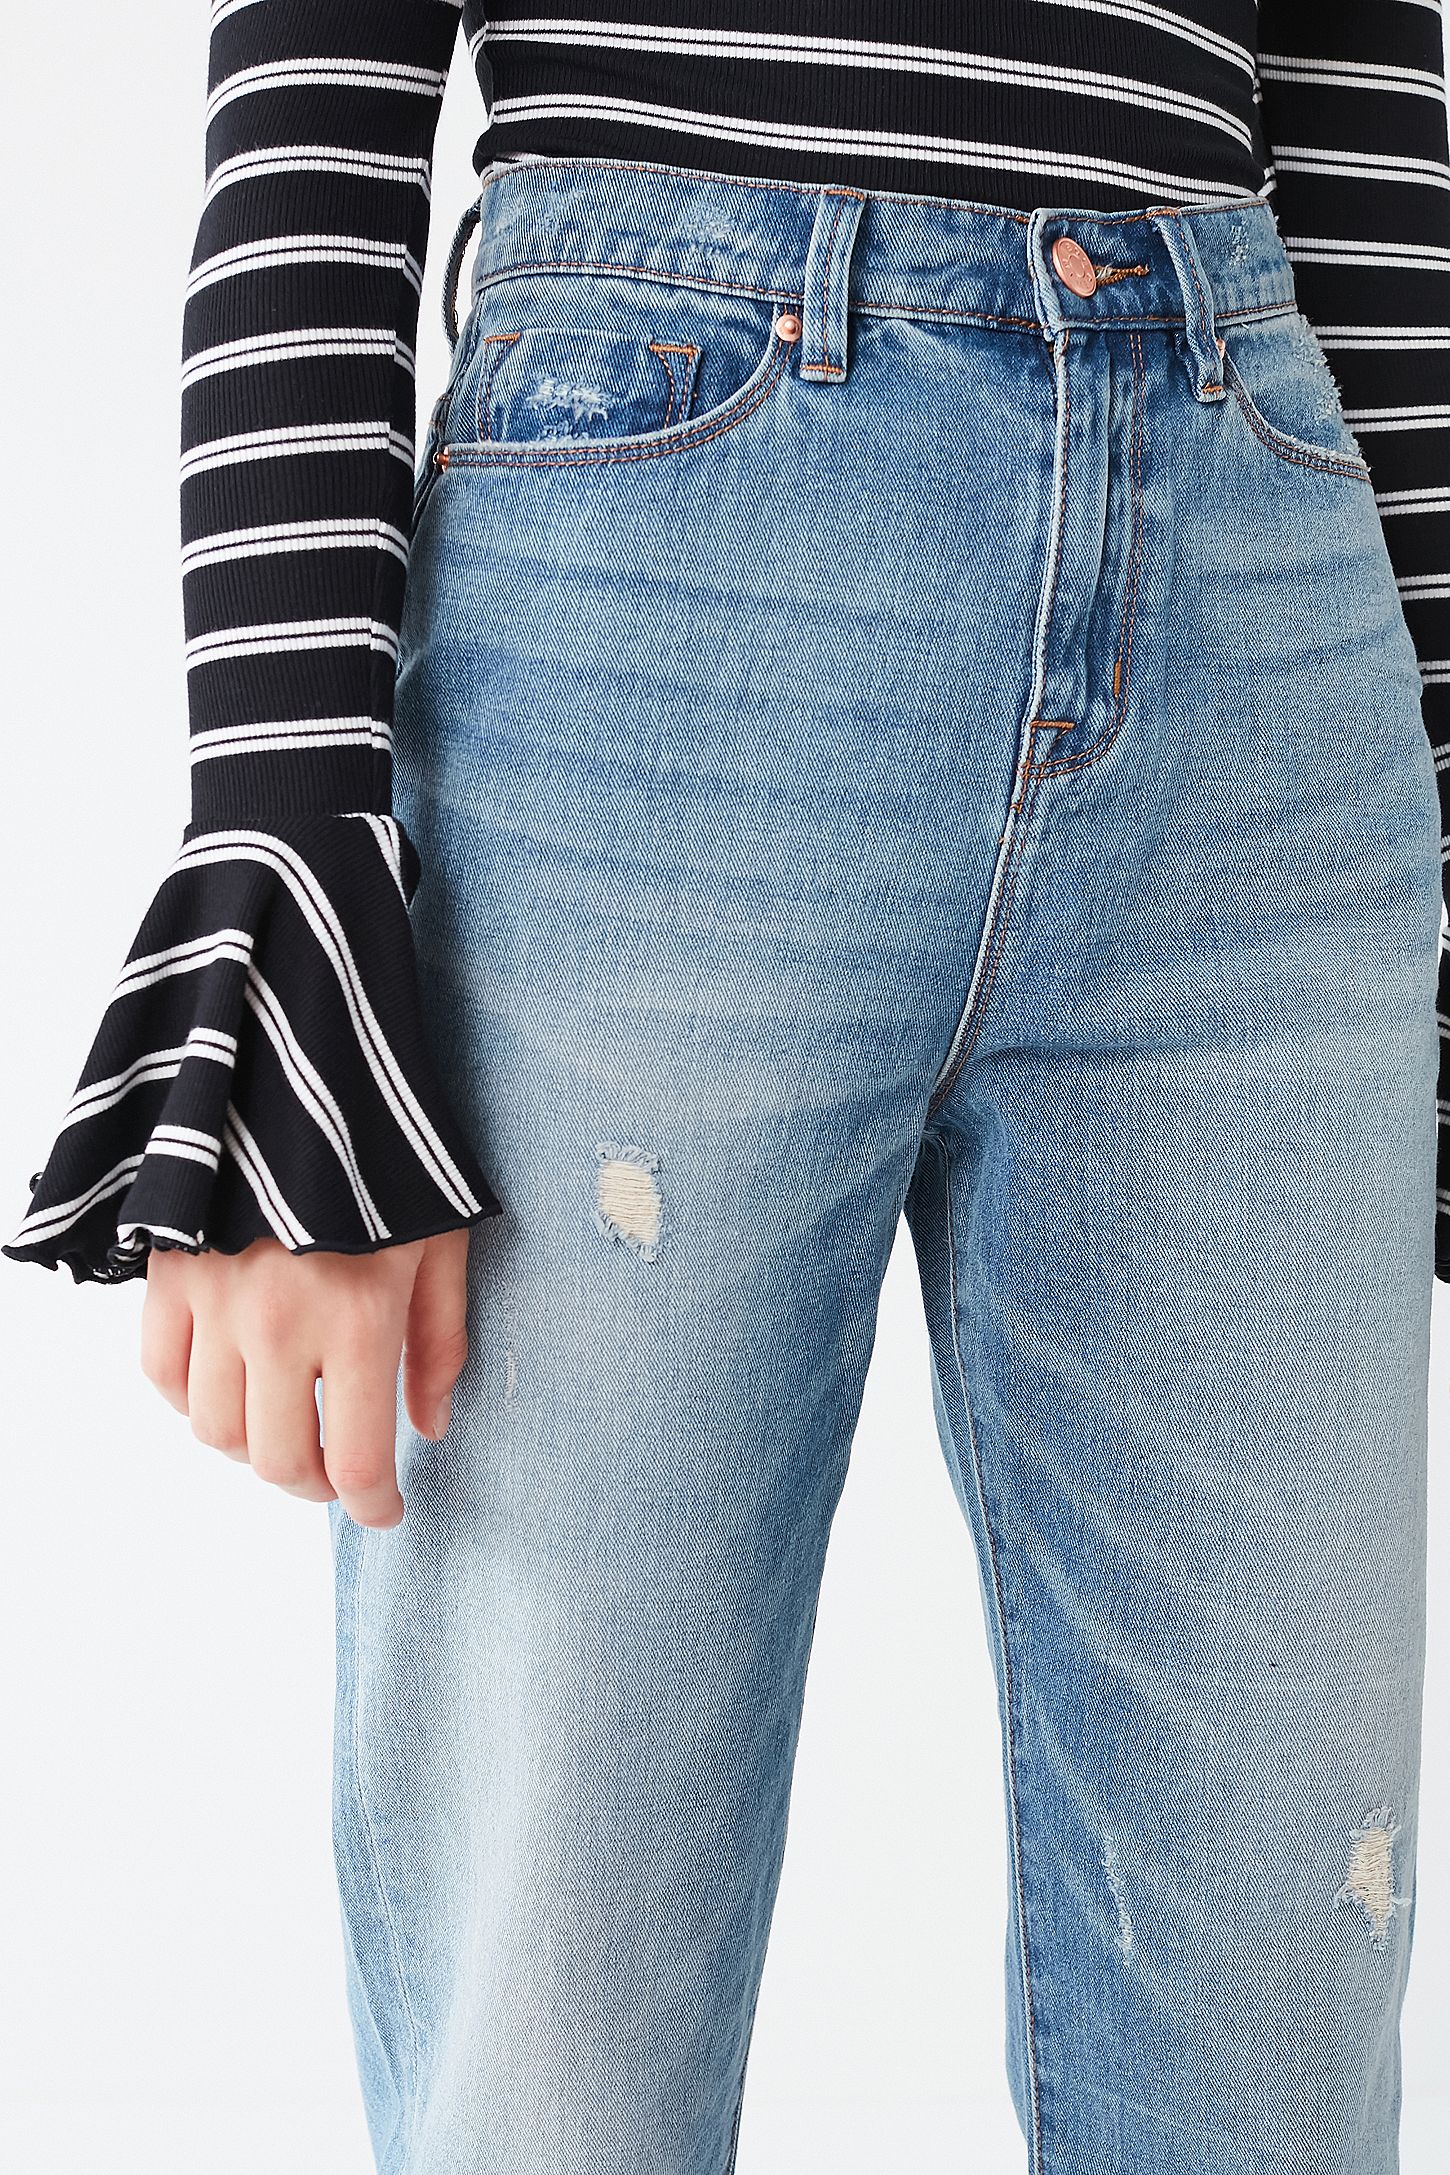 BDG Mom Jean - Vintage Wash | Urban Outfitters